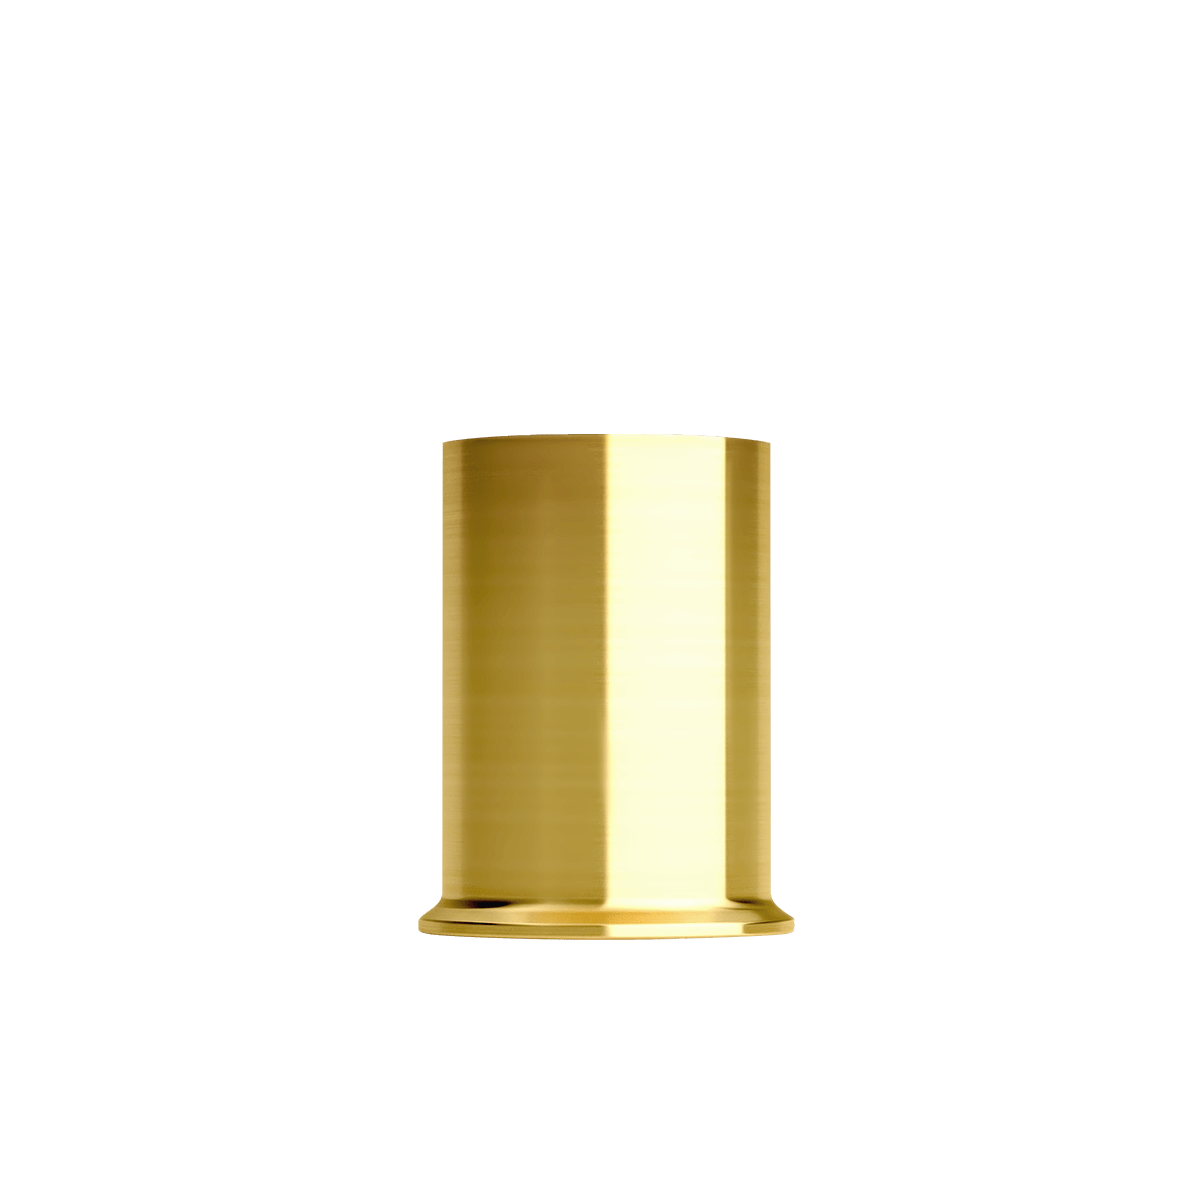 variant_600202% | Ambience - London base - Brass 8 | SACKit